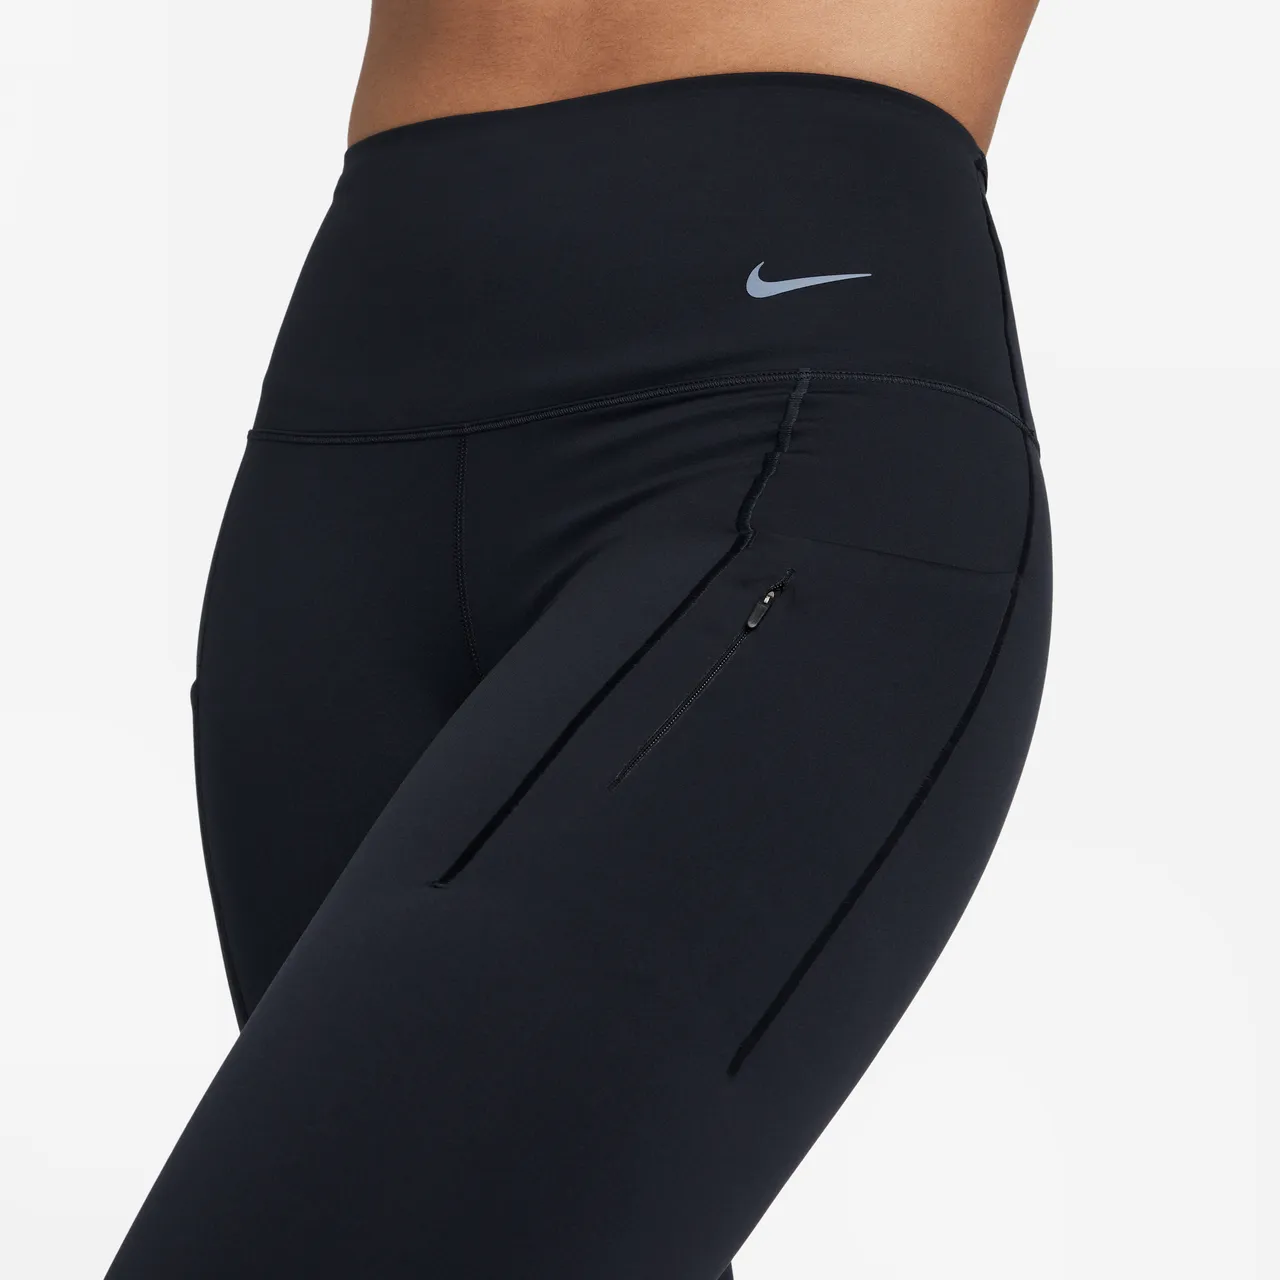 Nike Go Women's Therma-FIT High-Waisted 7/8 Leggings with Pockets - Black - Nylon